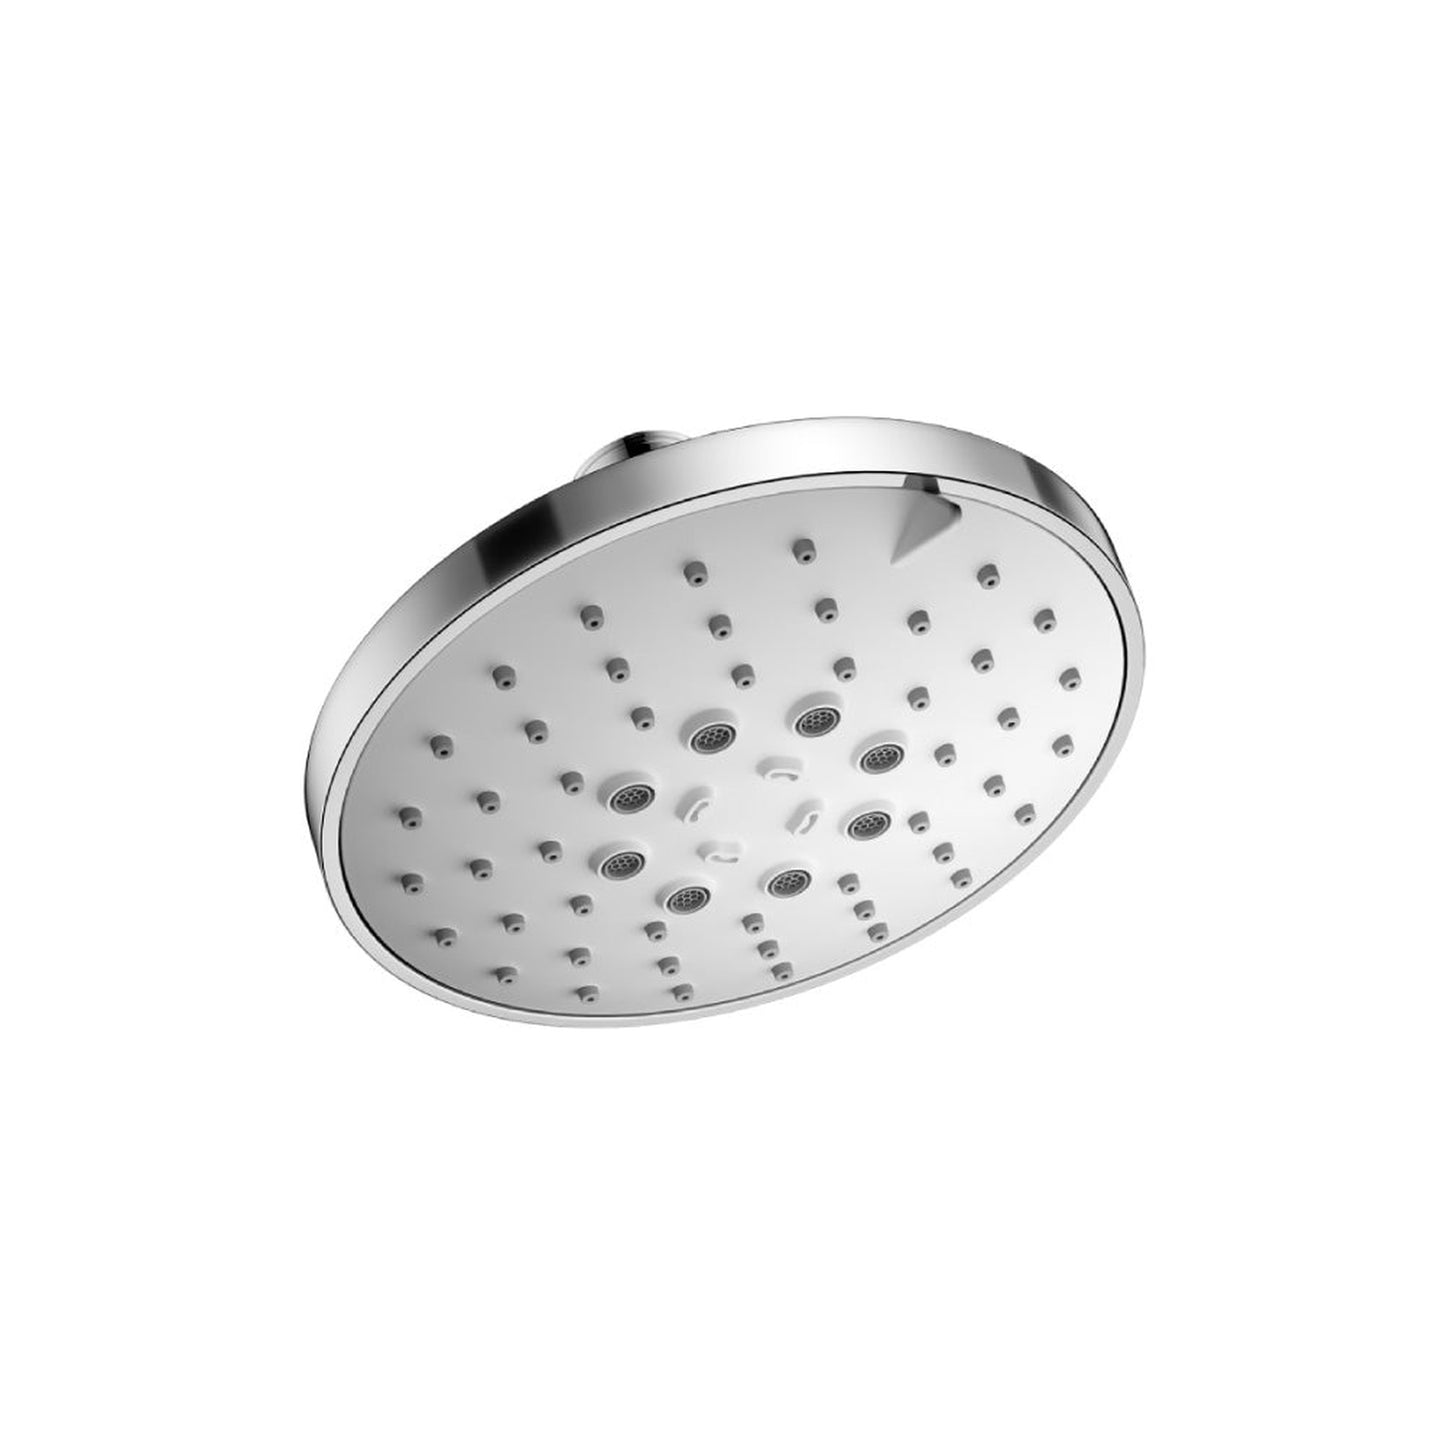 Isenberg Universal Fixtures 3-Function ABS Showerhead in Chrome